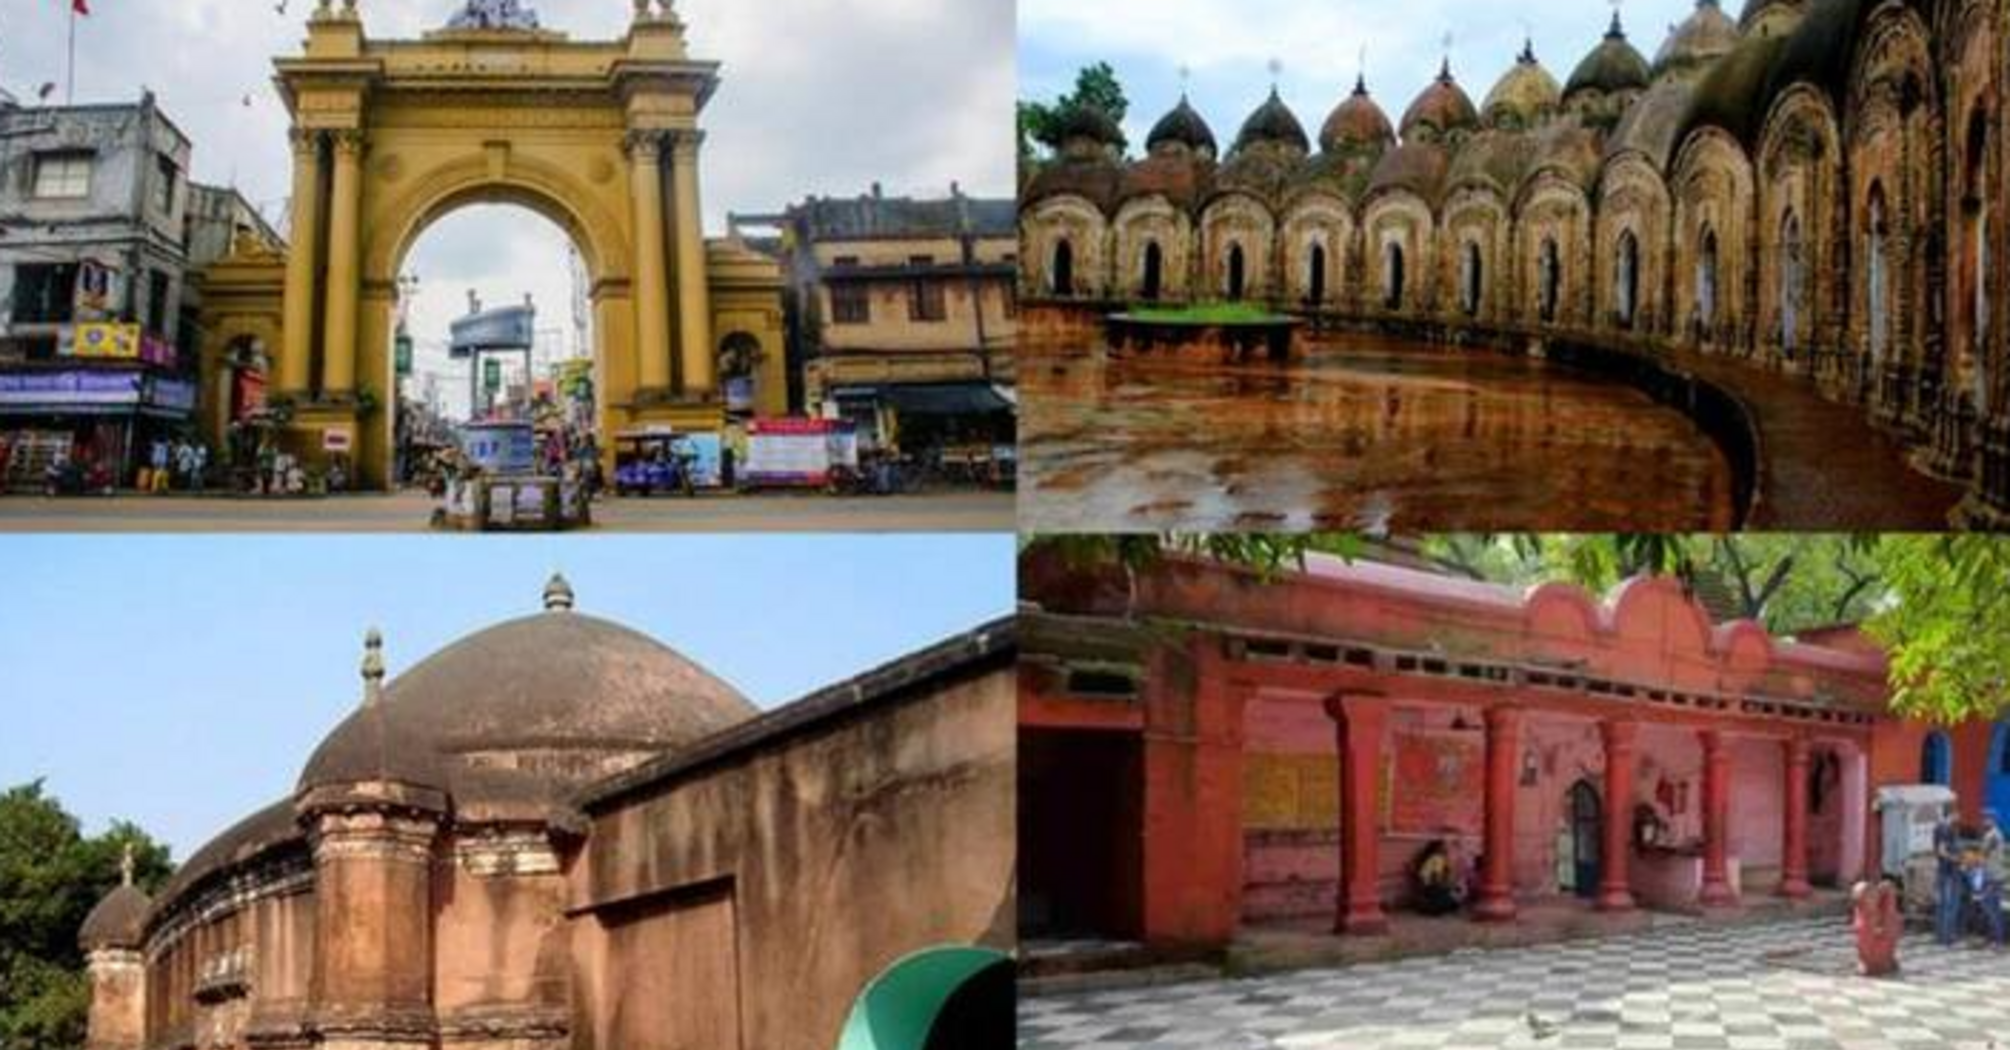 The most famous temples of Burdwan